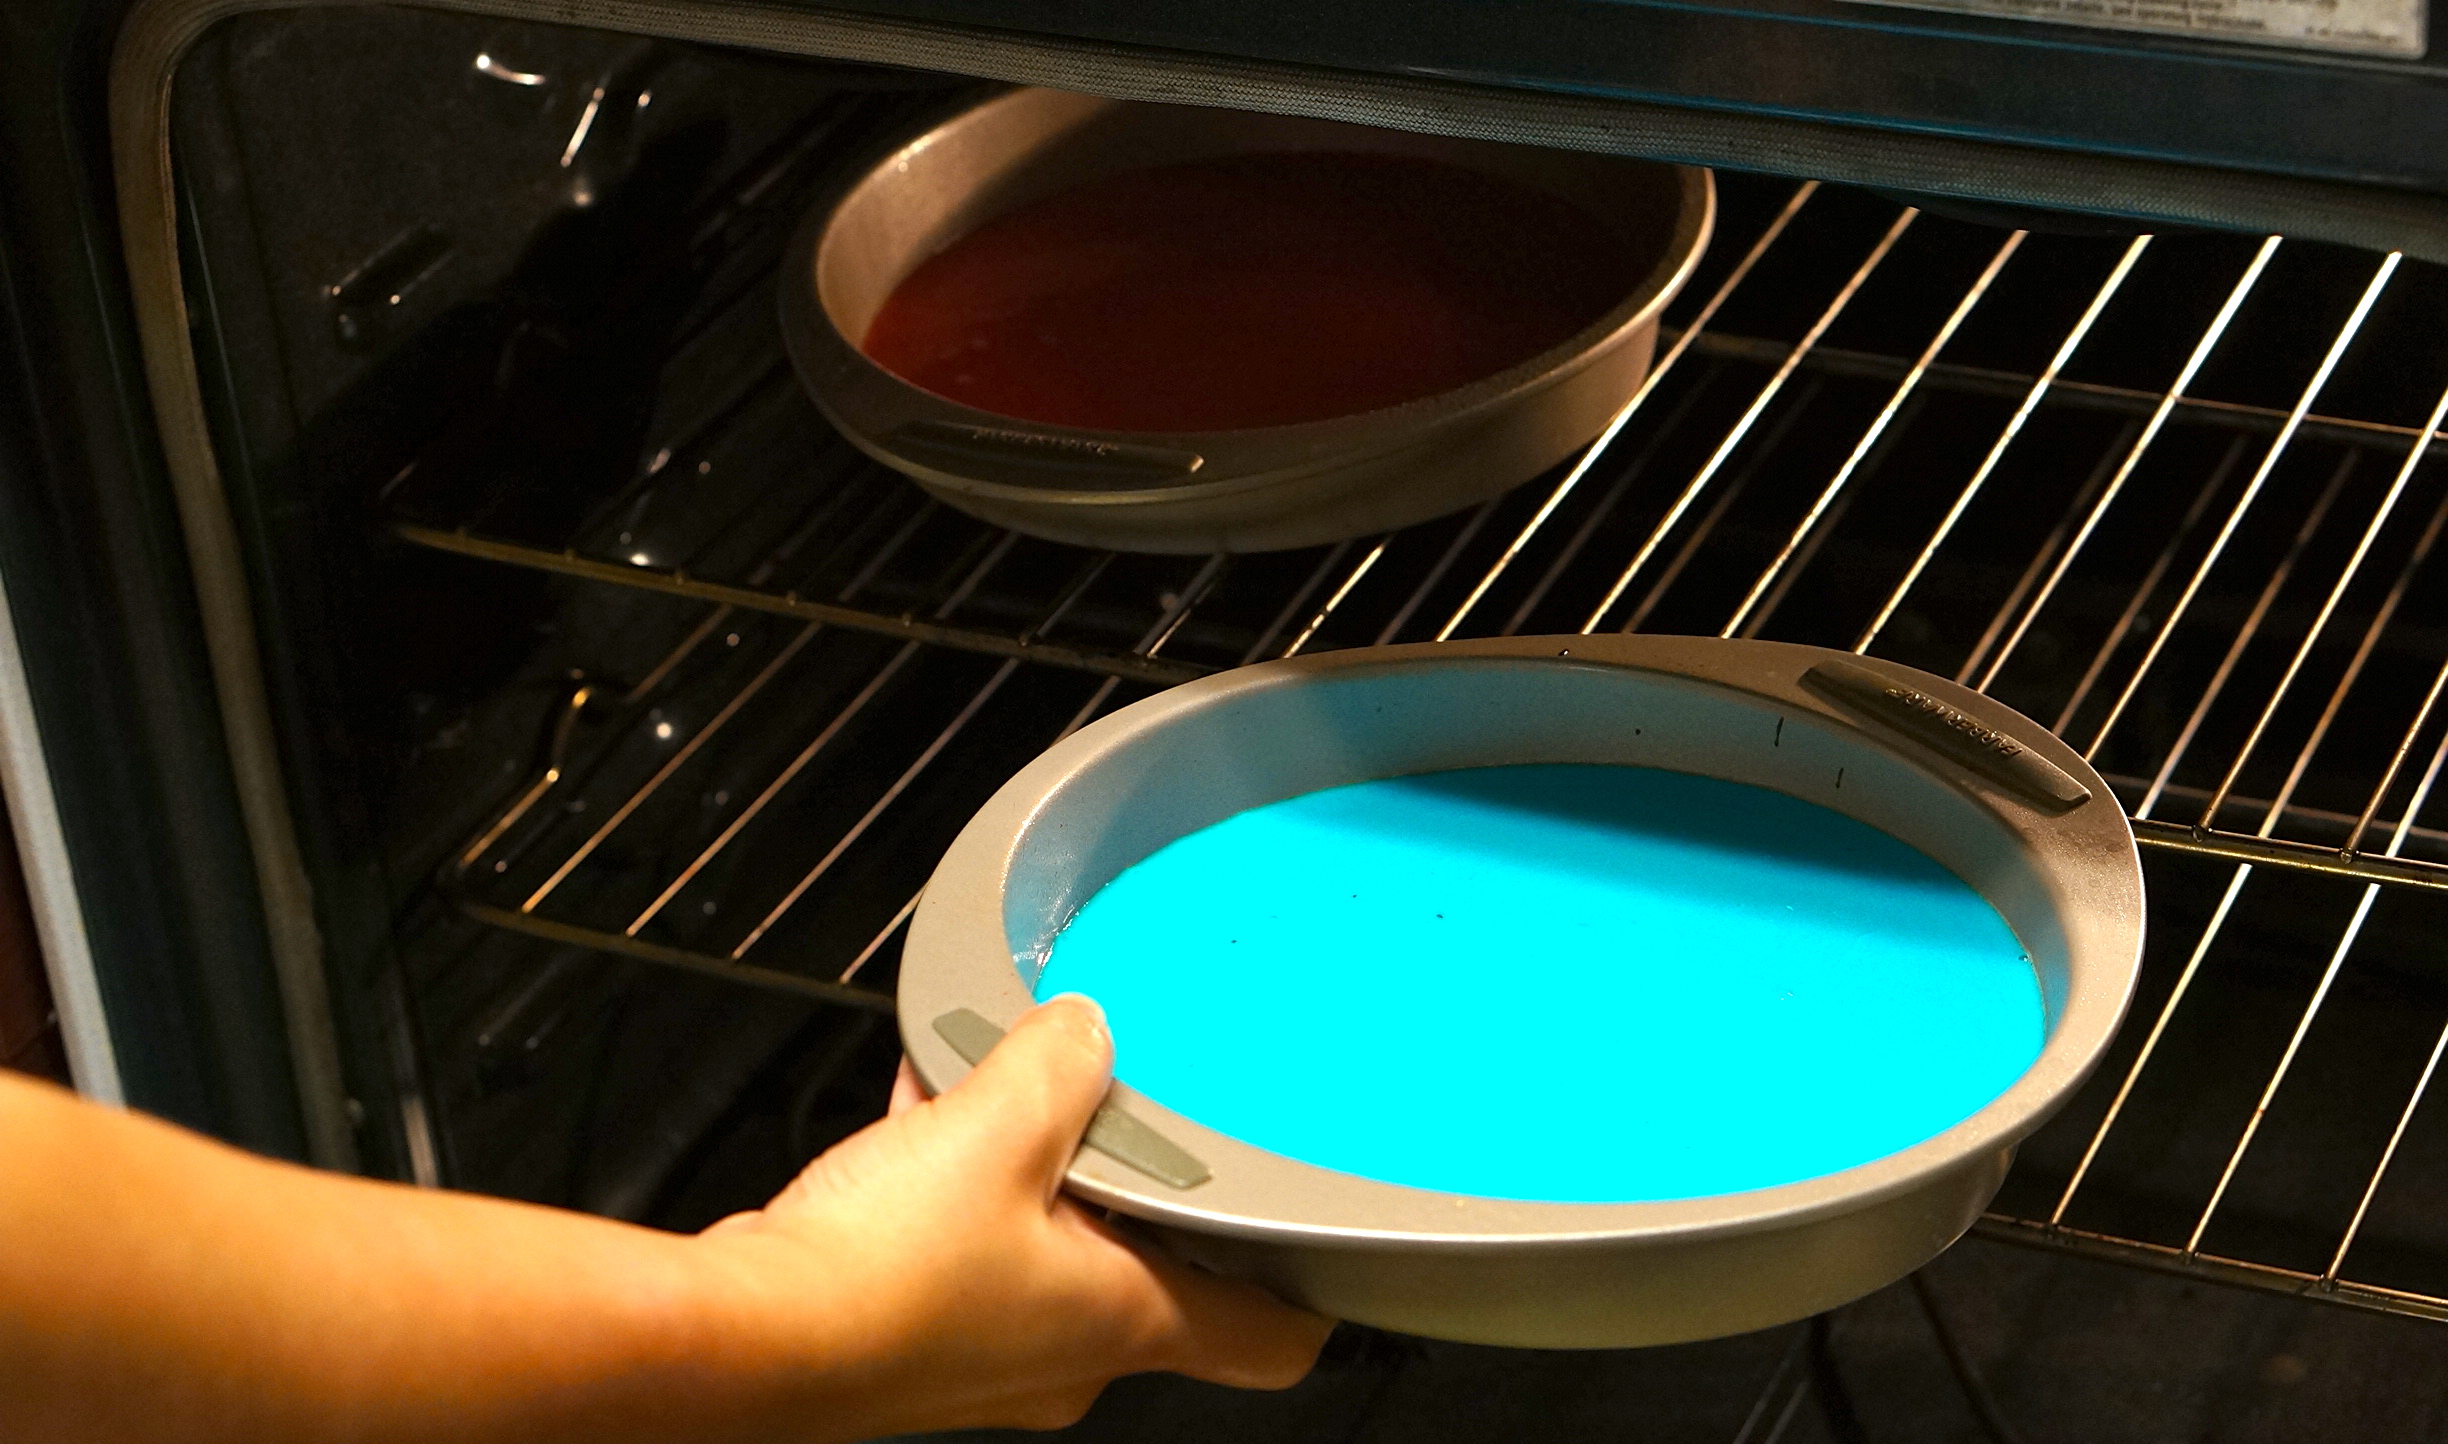 bake-red-and-blue-cake